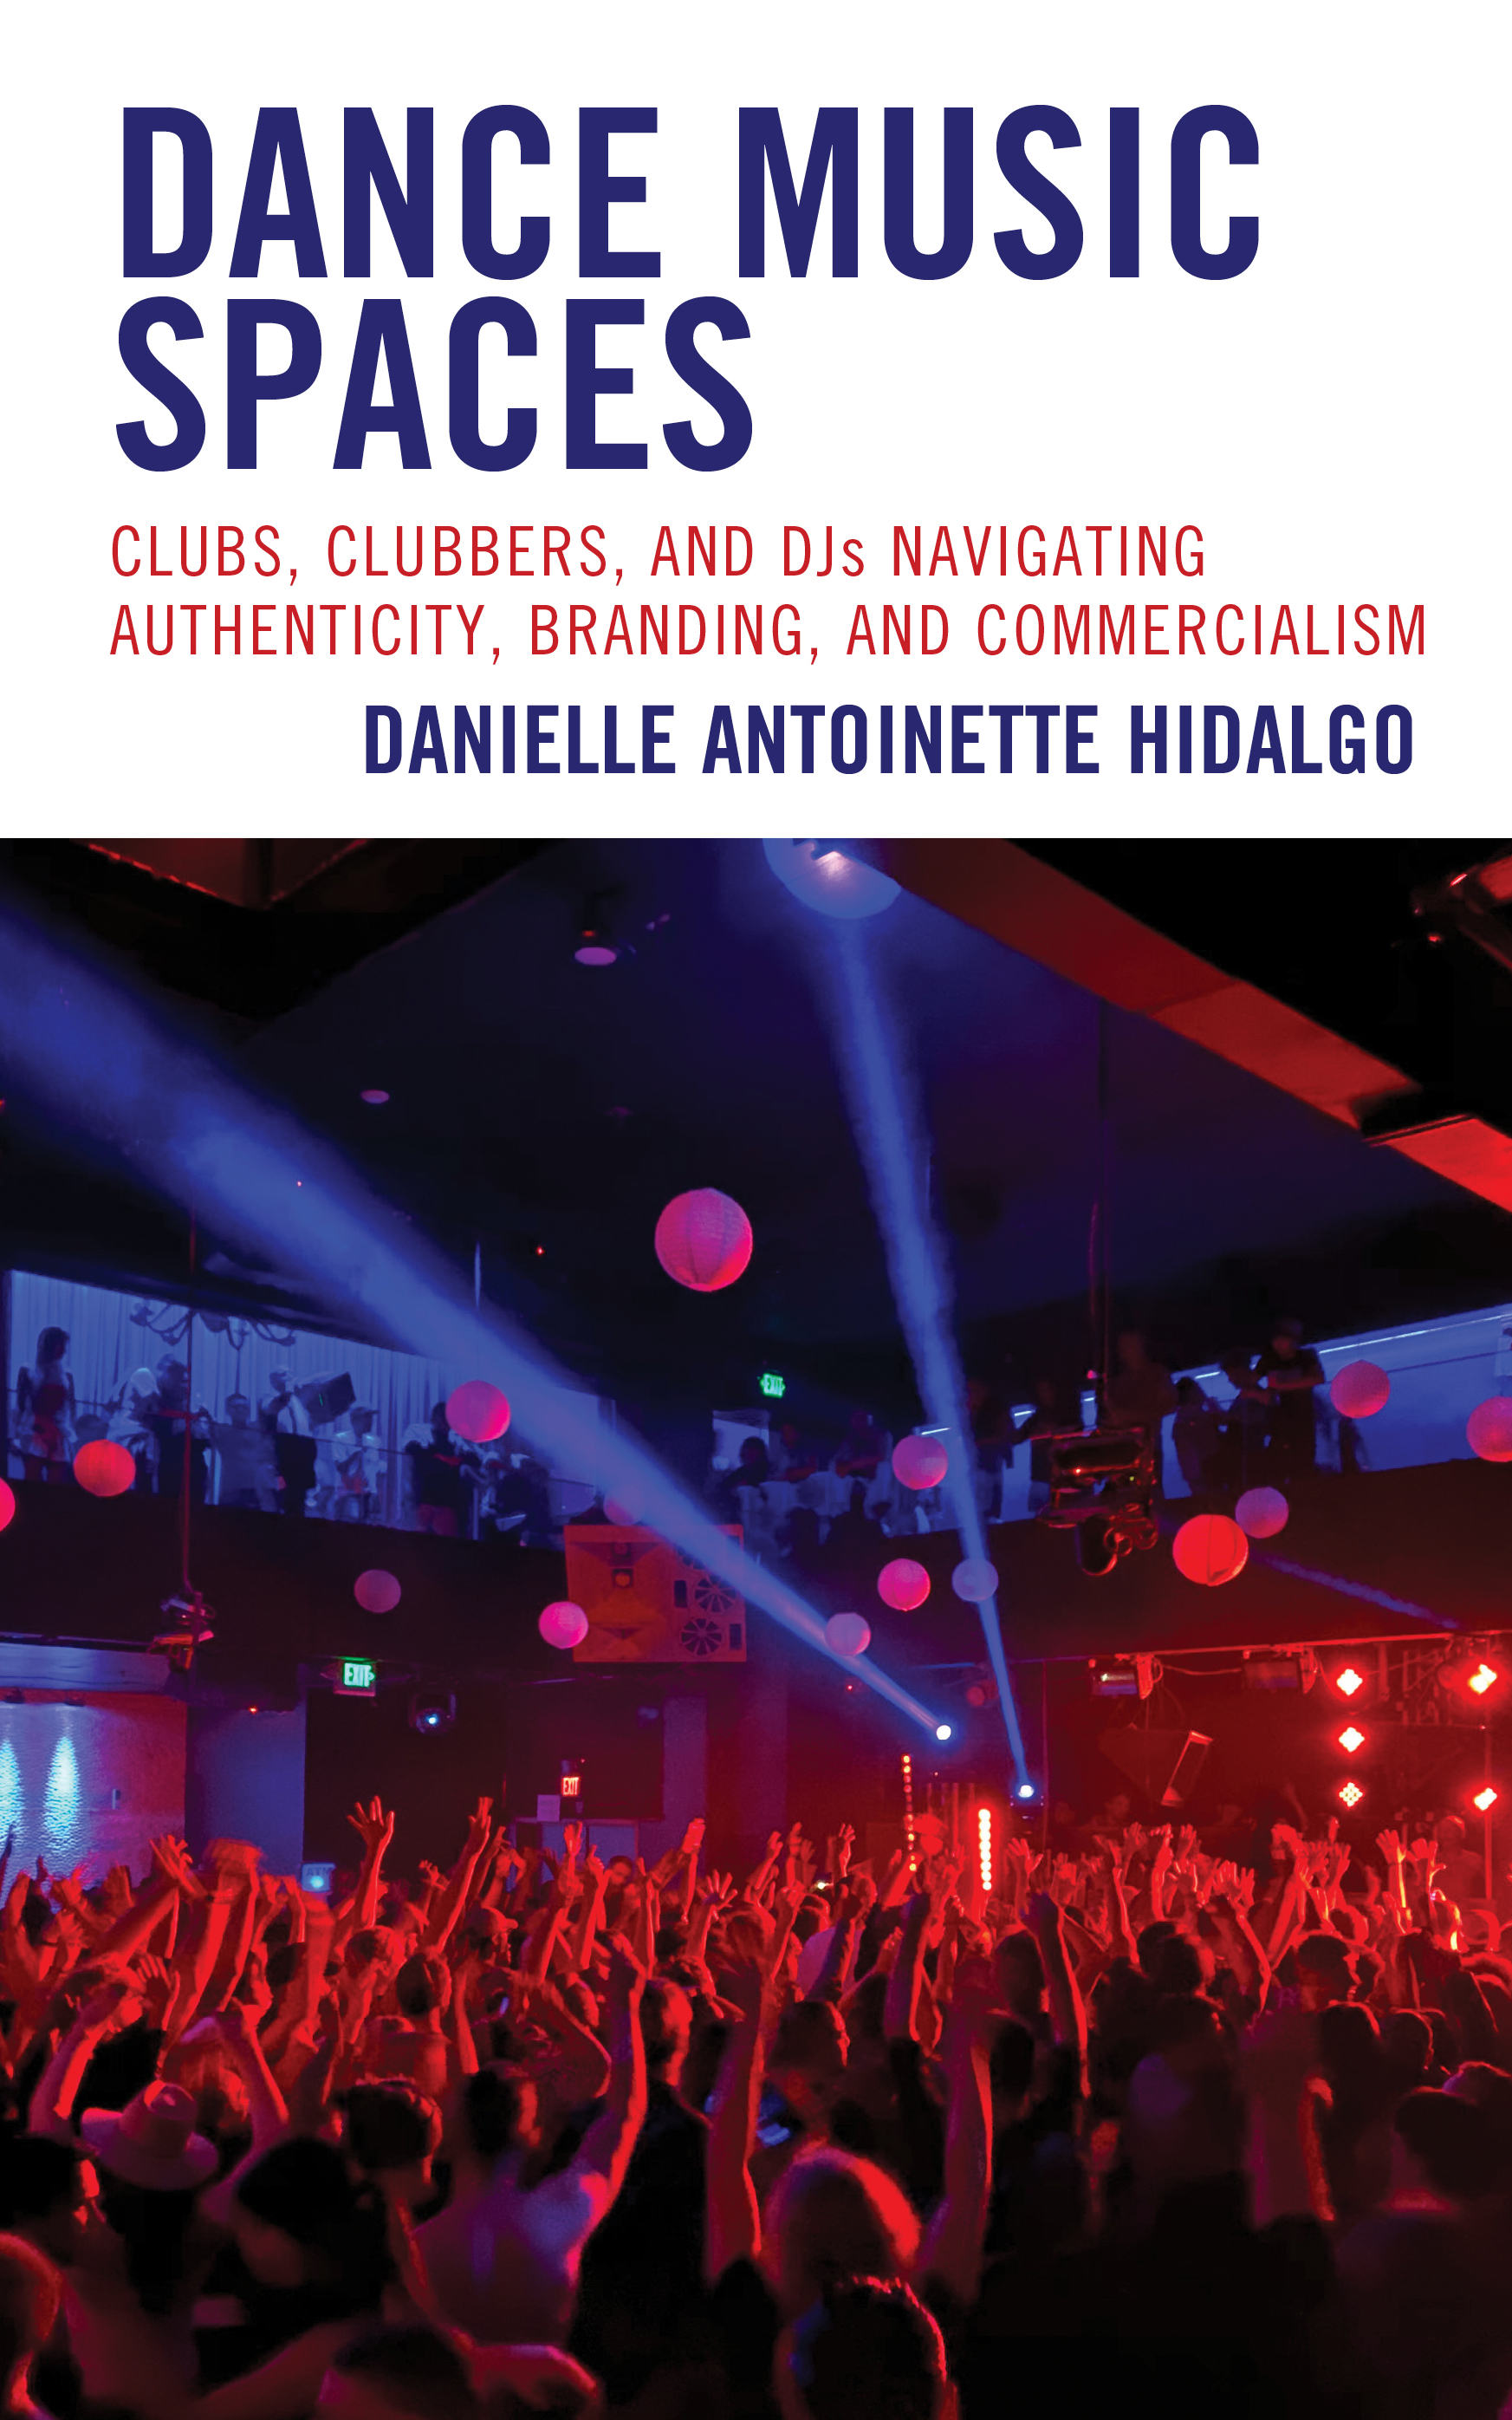 Dance Music Spaces: Clubs, Clubbers, and DJs Navigating Authenticity, Branding, and Commercialism